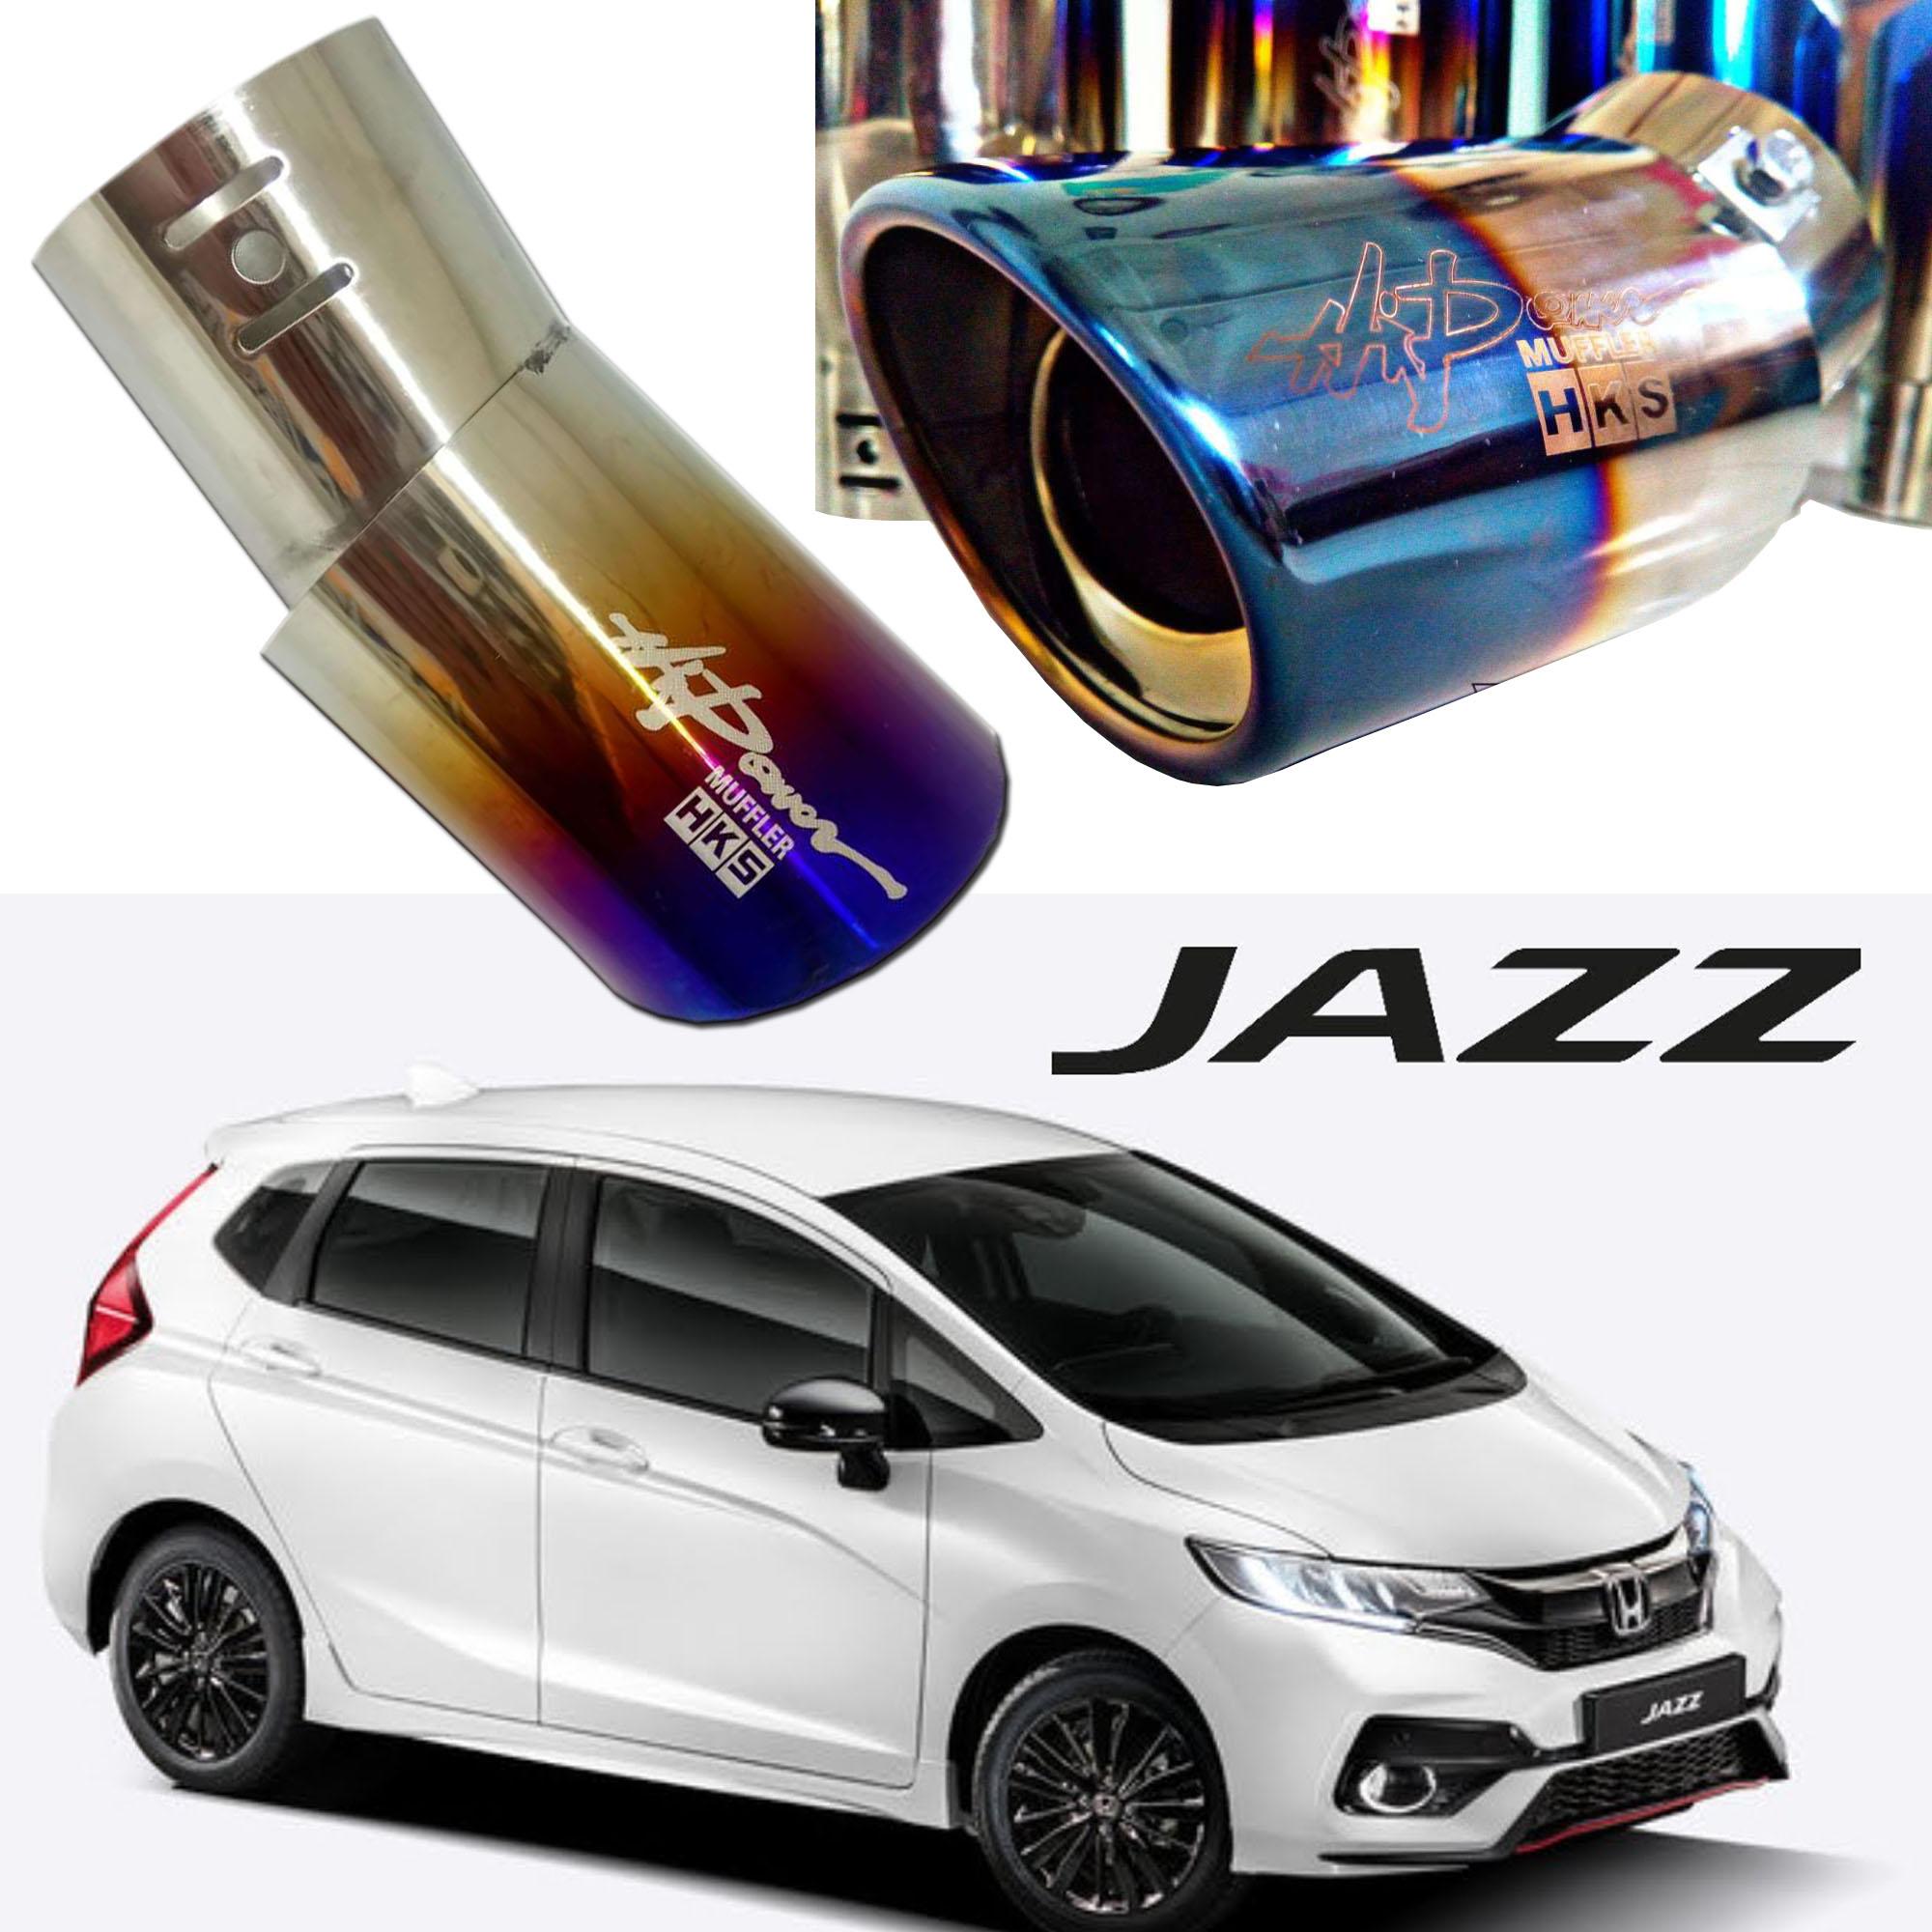 Stainless Steel tail end pipe exhaust muffler tip for Honda FIT JAZZ 2014 2015 A